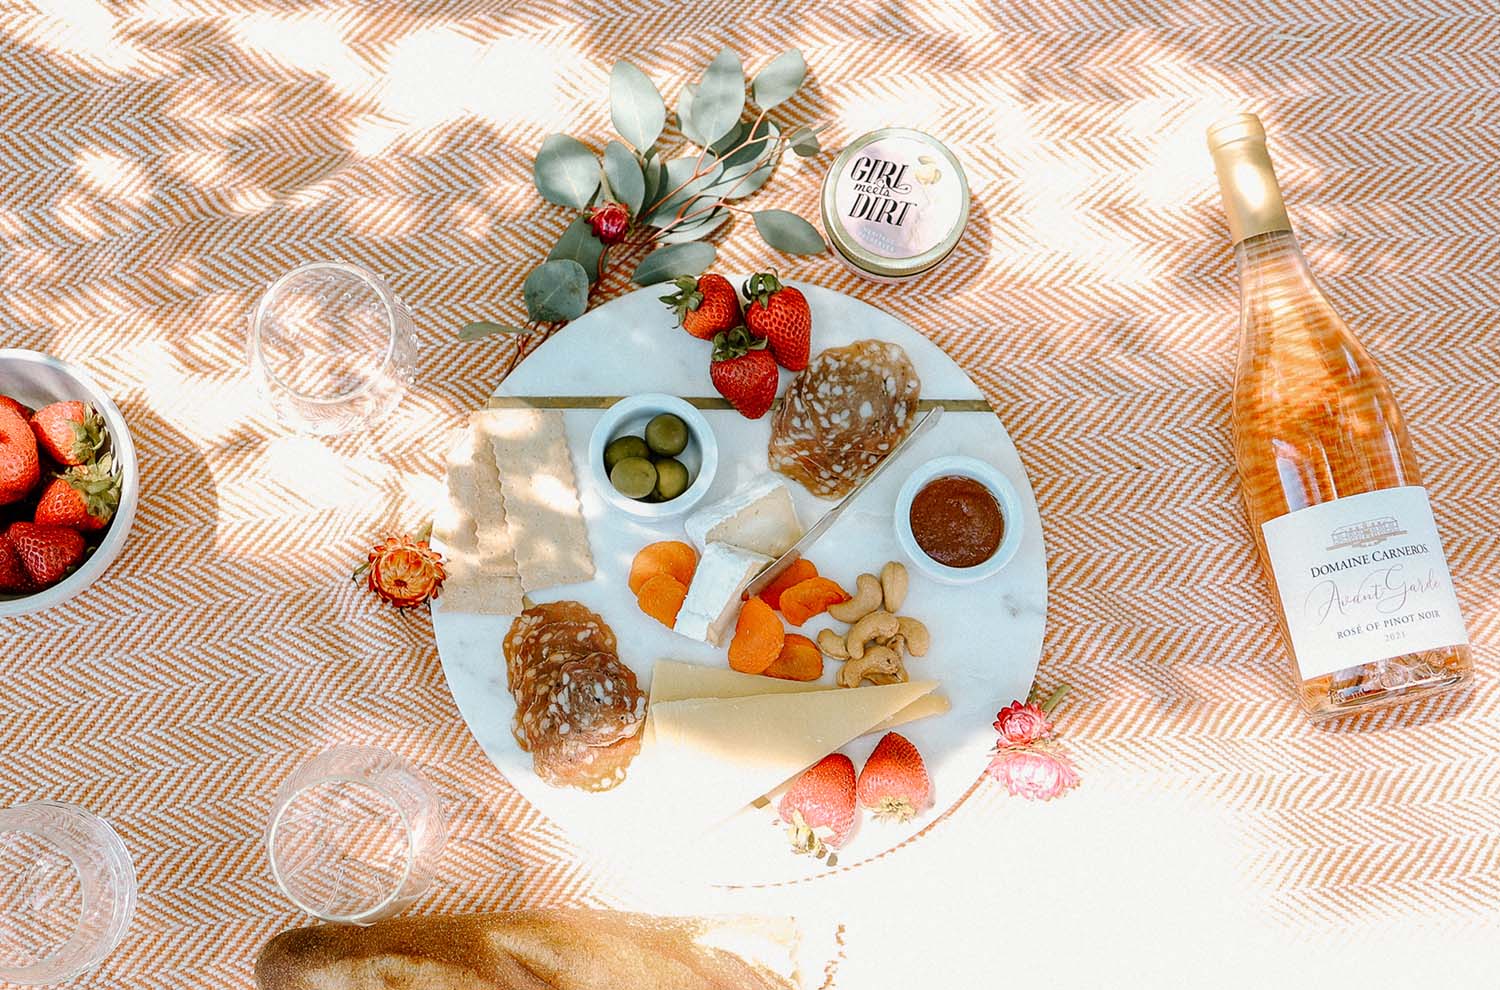 picnic blanket with bottle of rose, cheese board, bowl of strawberries